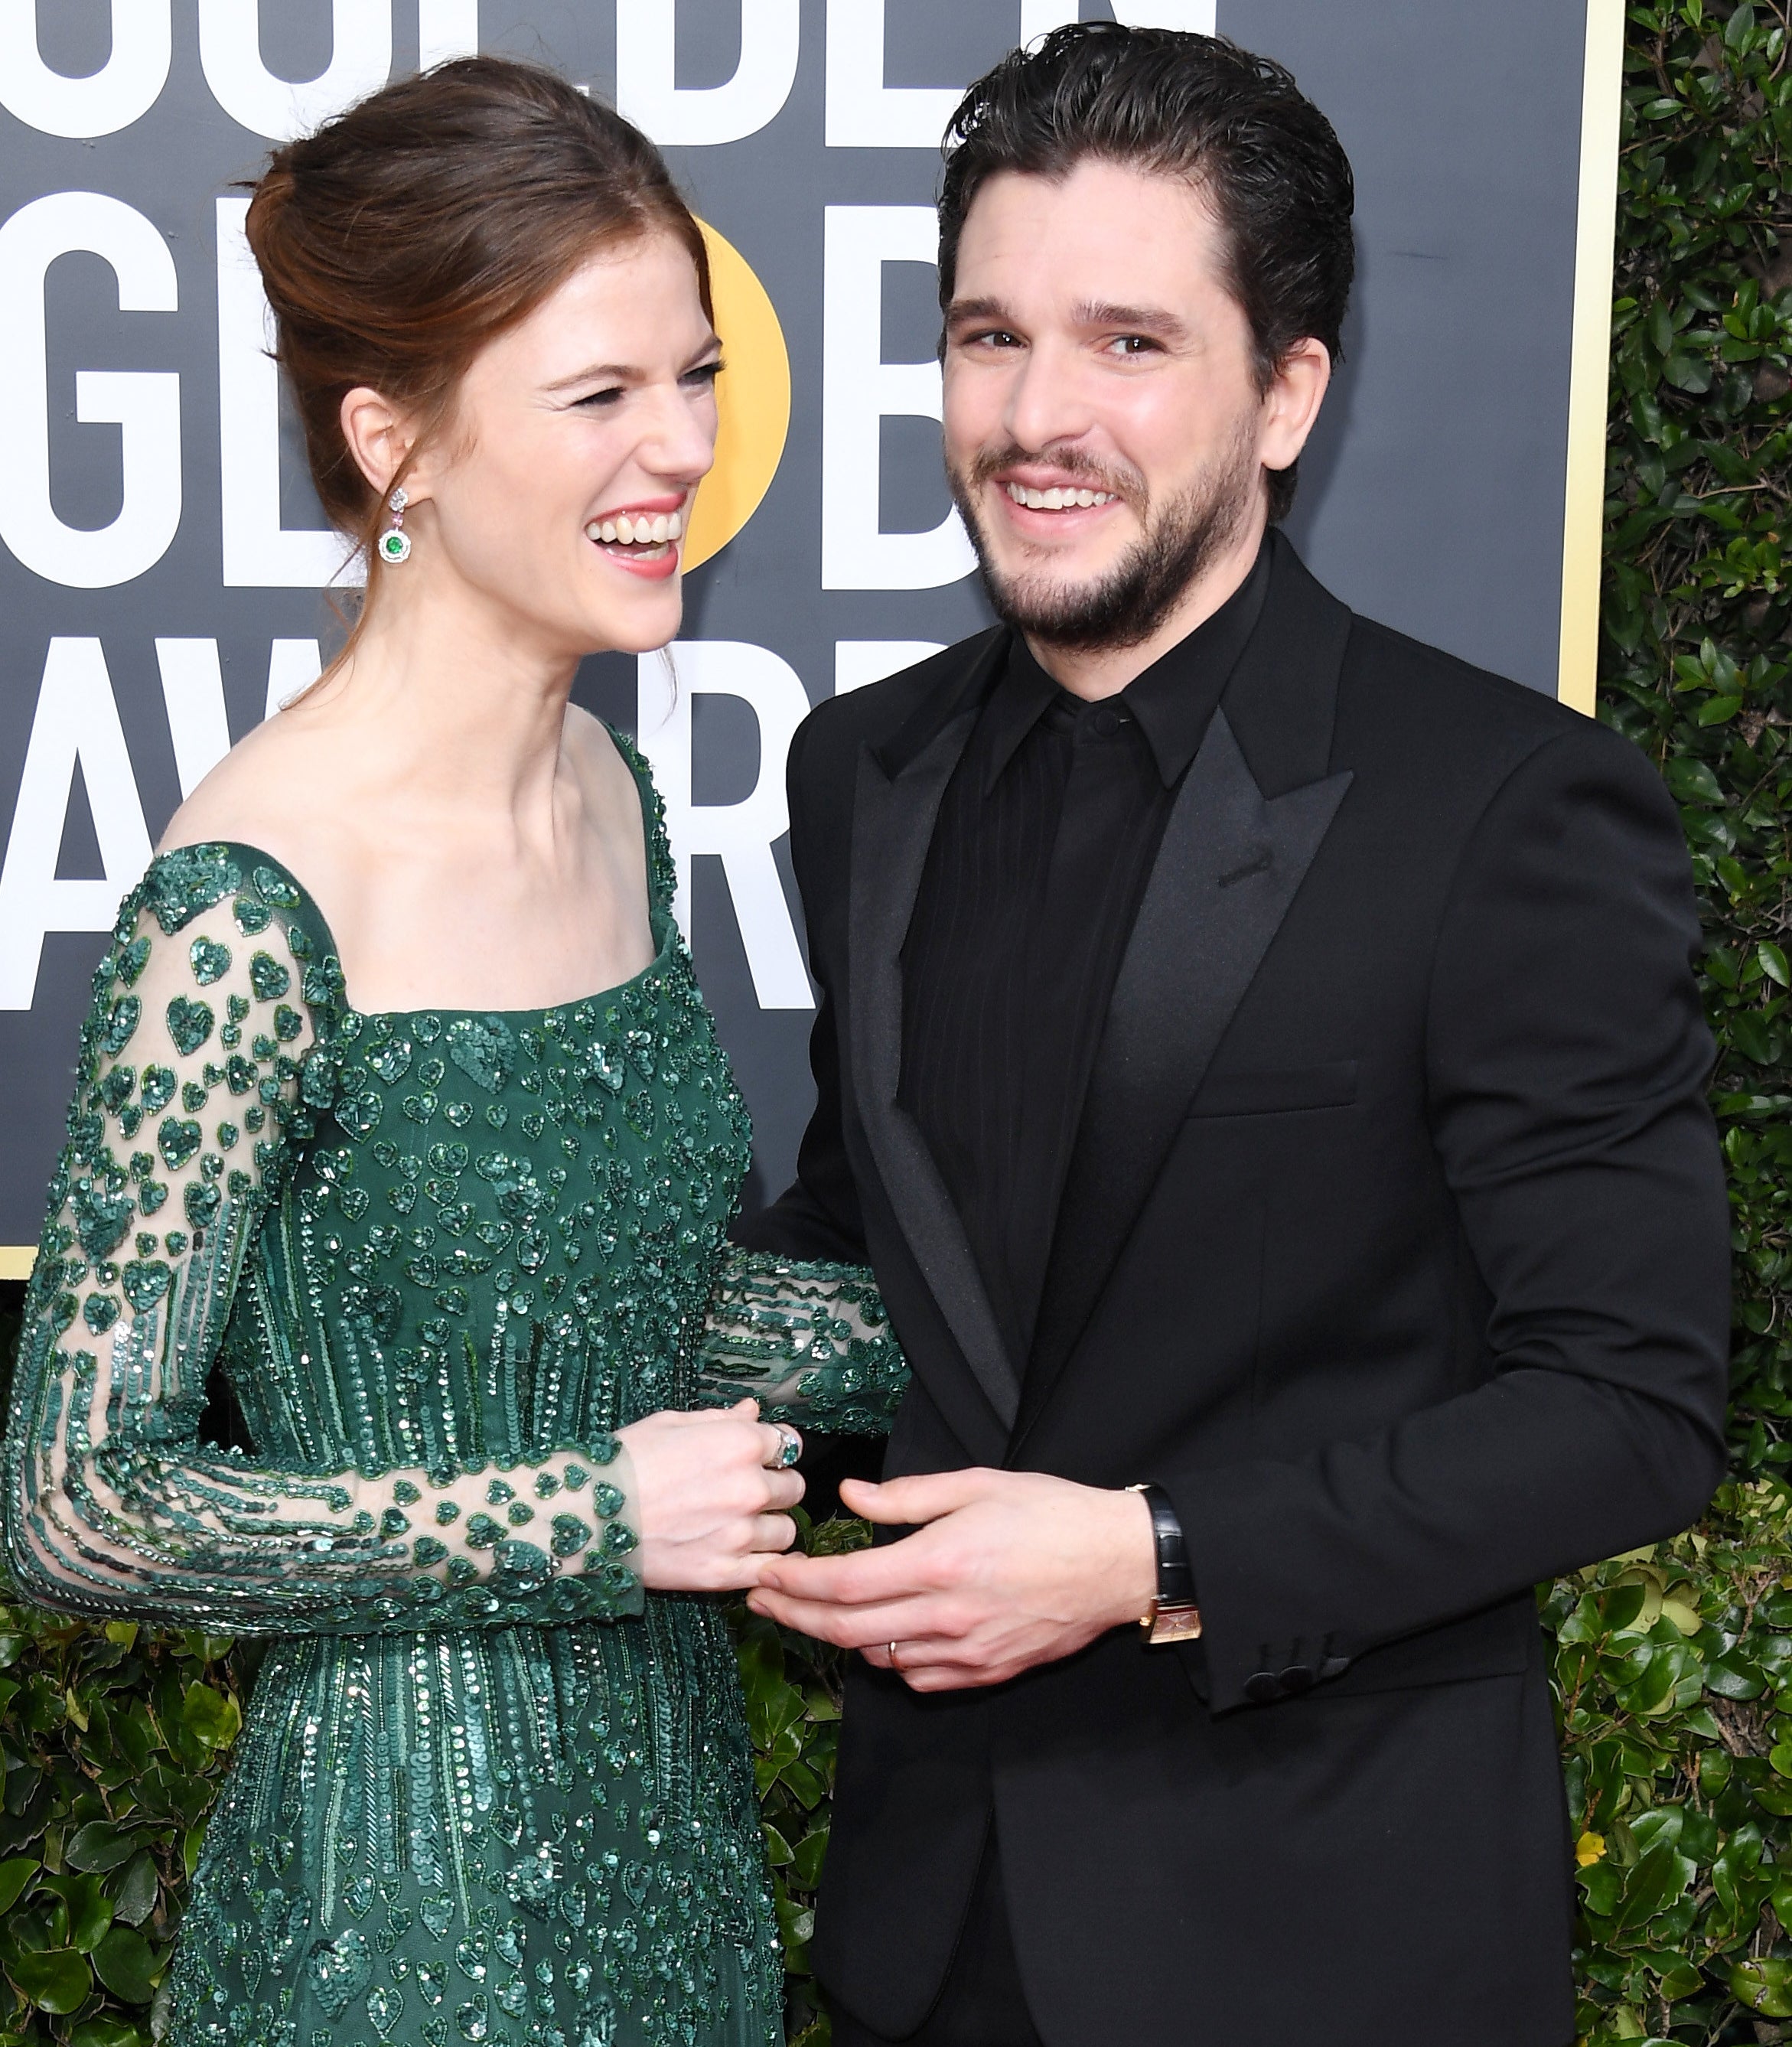 Rose Leslie in beaded gown with Kit Harington in 3-piece suit at Golden Globe Awards